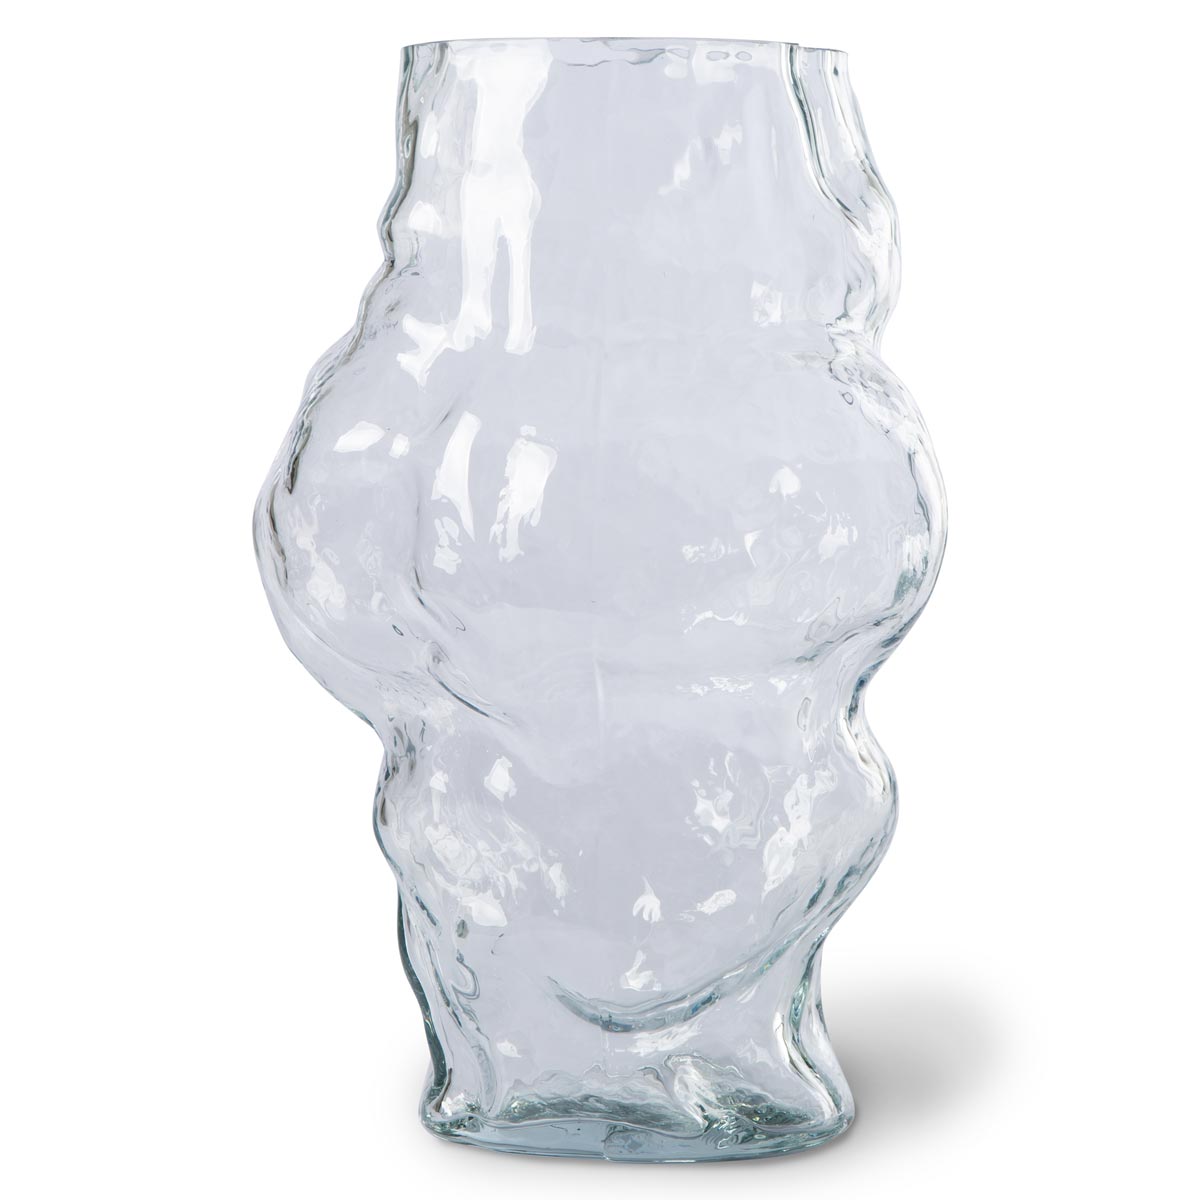 HK Objects: Cloud Vase Clear Glass High